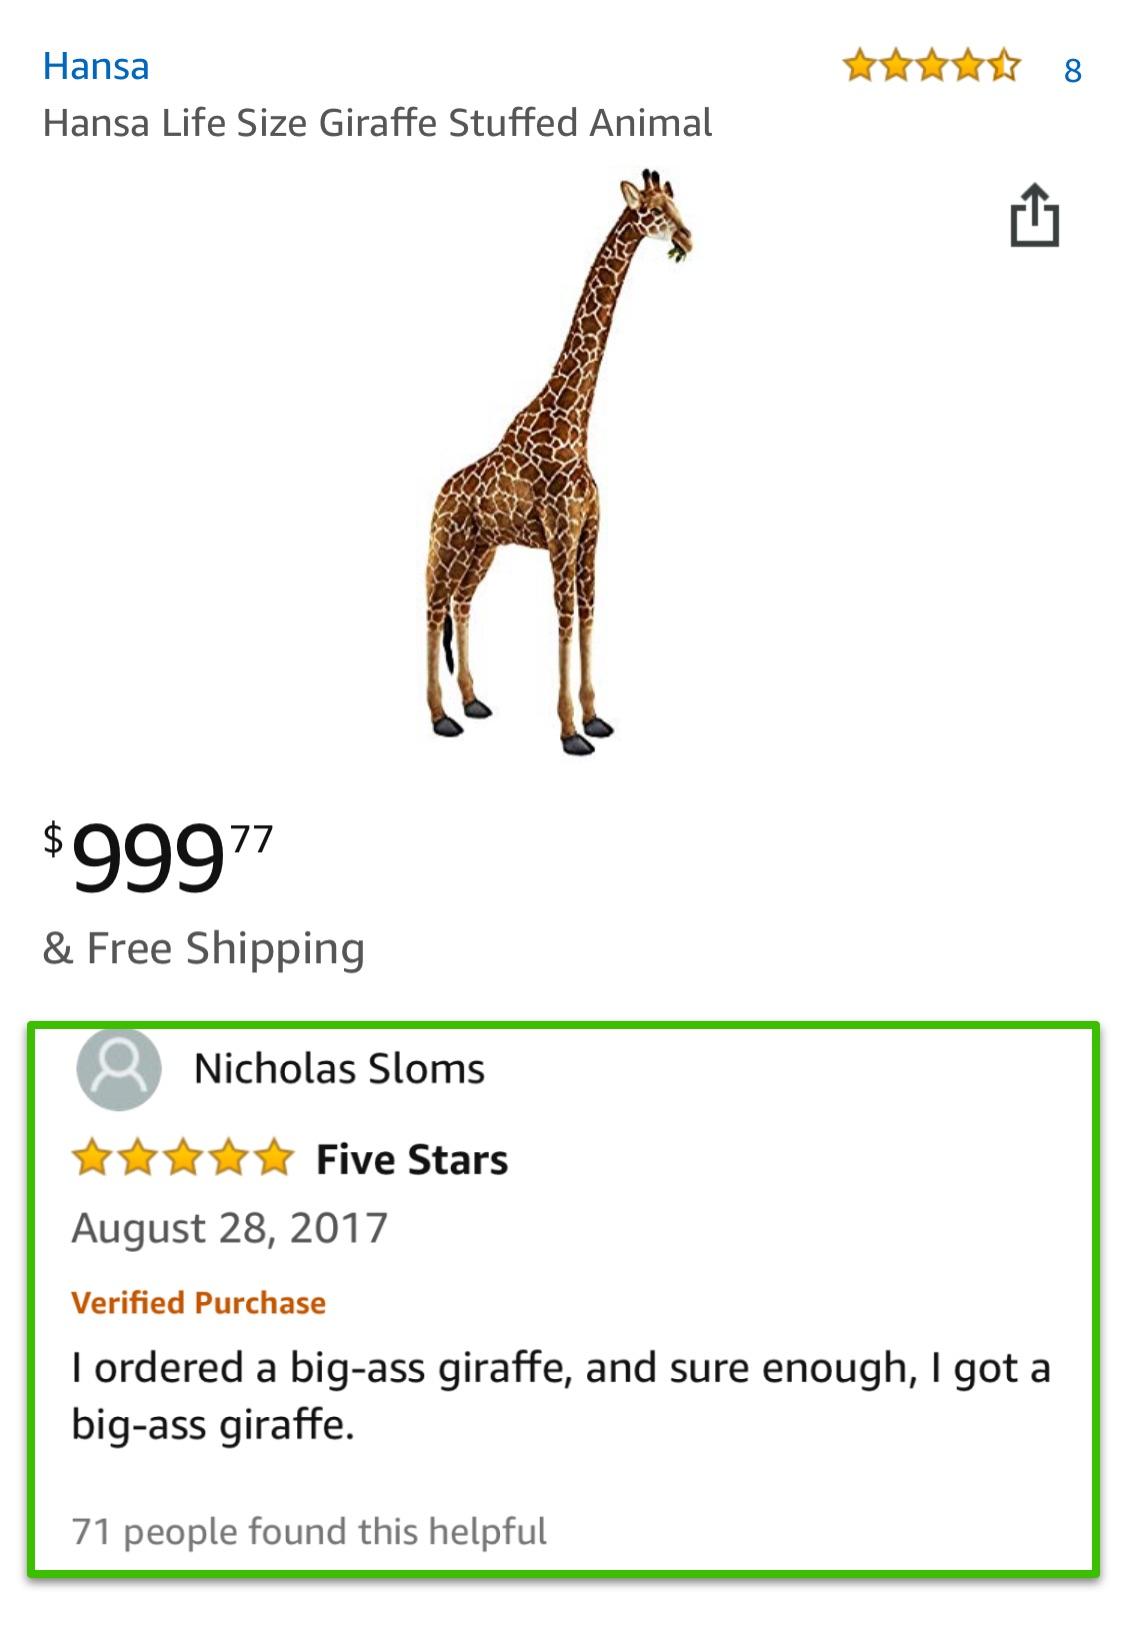 This+review+for+a+life-sized+stuffed+giraffe.